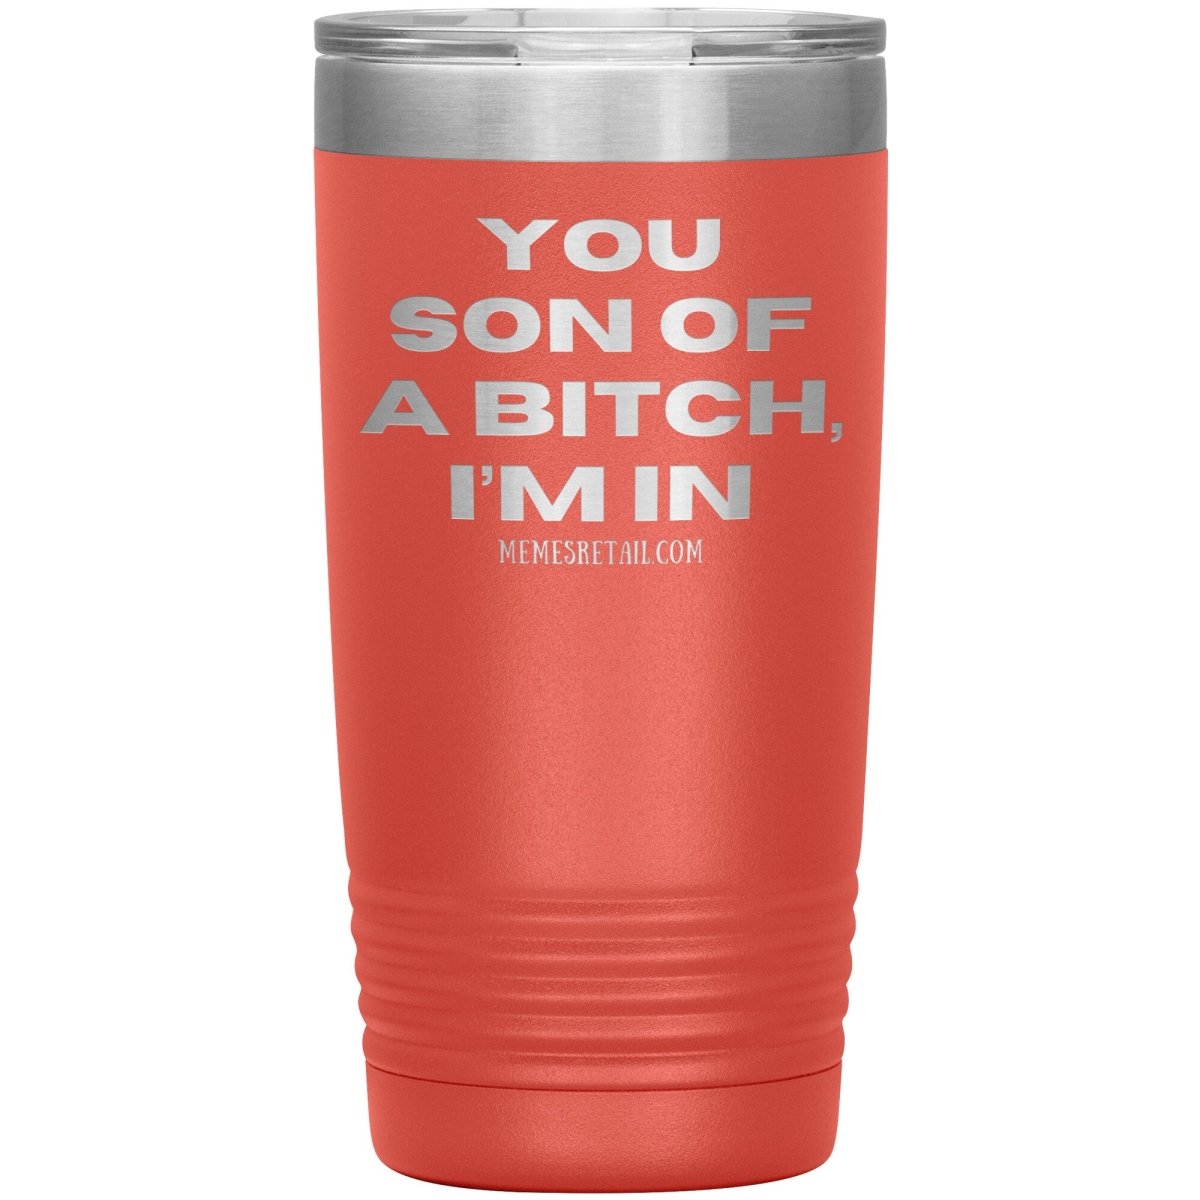 You son of a bitch, I’m in Tumblers, 20oz Insulated Tumbler / Coral - MemesRetail.com